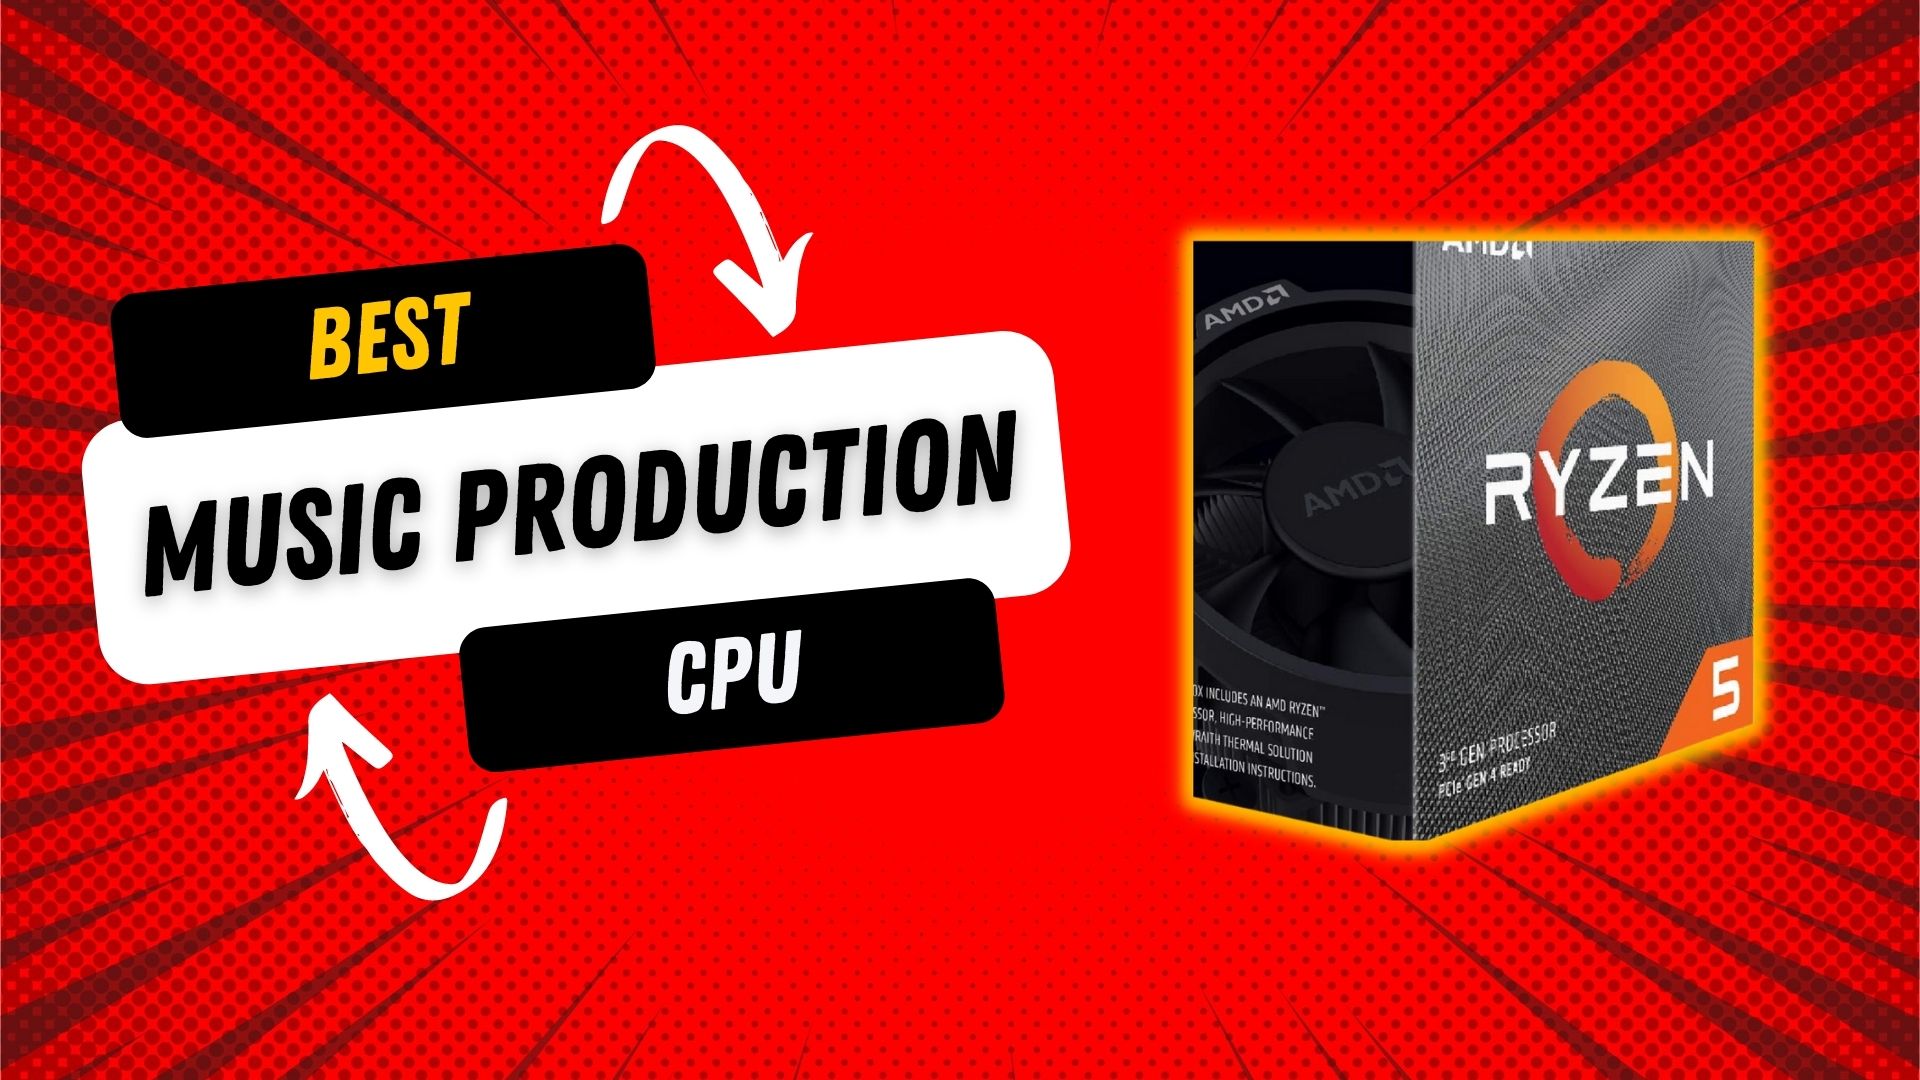 The Best PC For Music Production 2022  Ryzen 3900x Build for MPC, FL Studio  & Ableton Beatmaking 